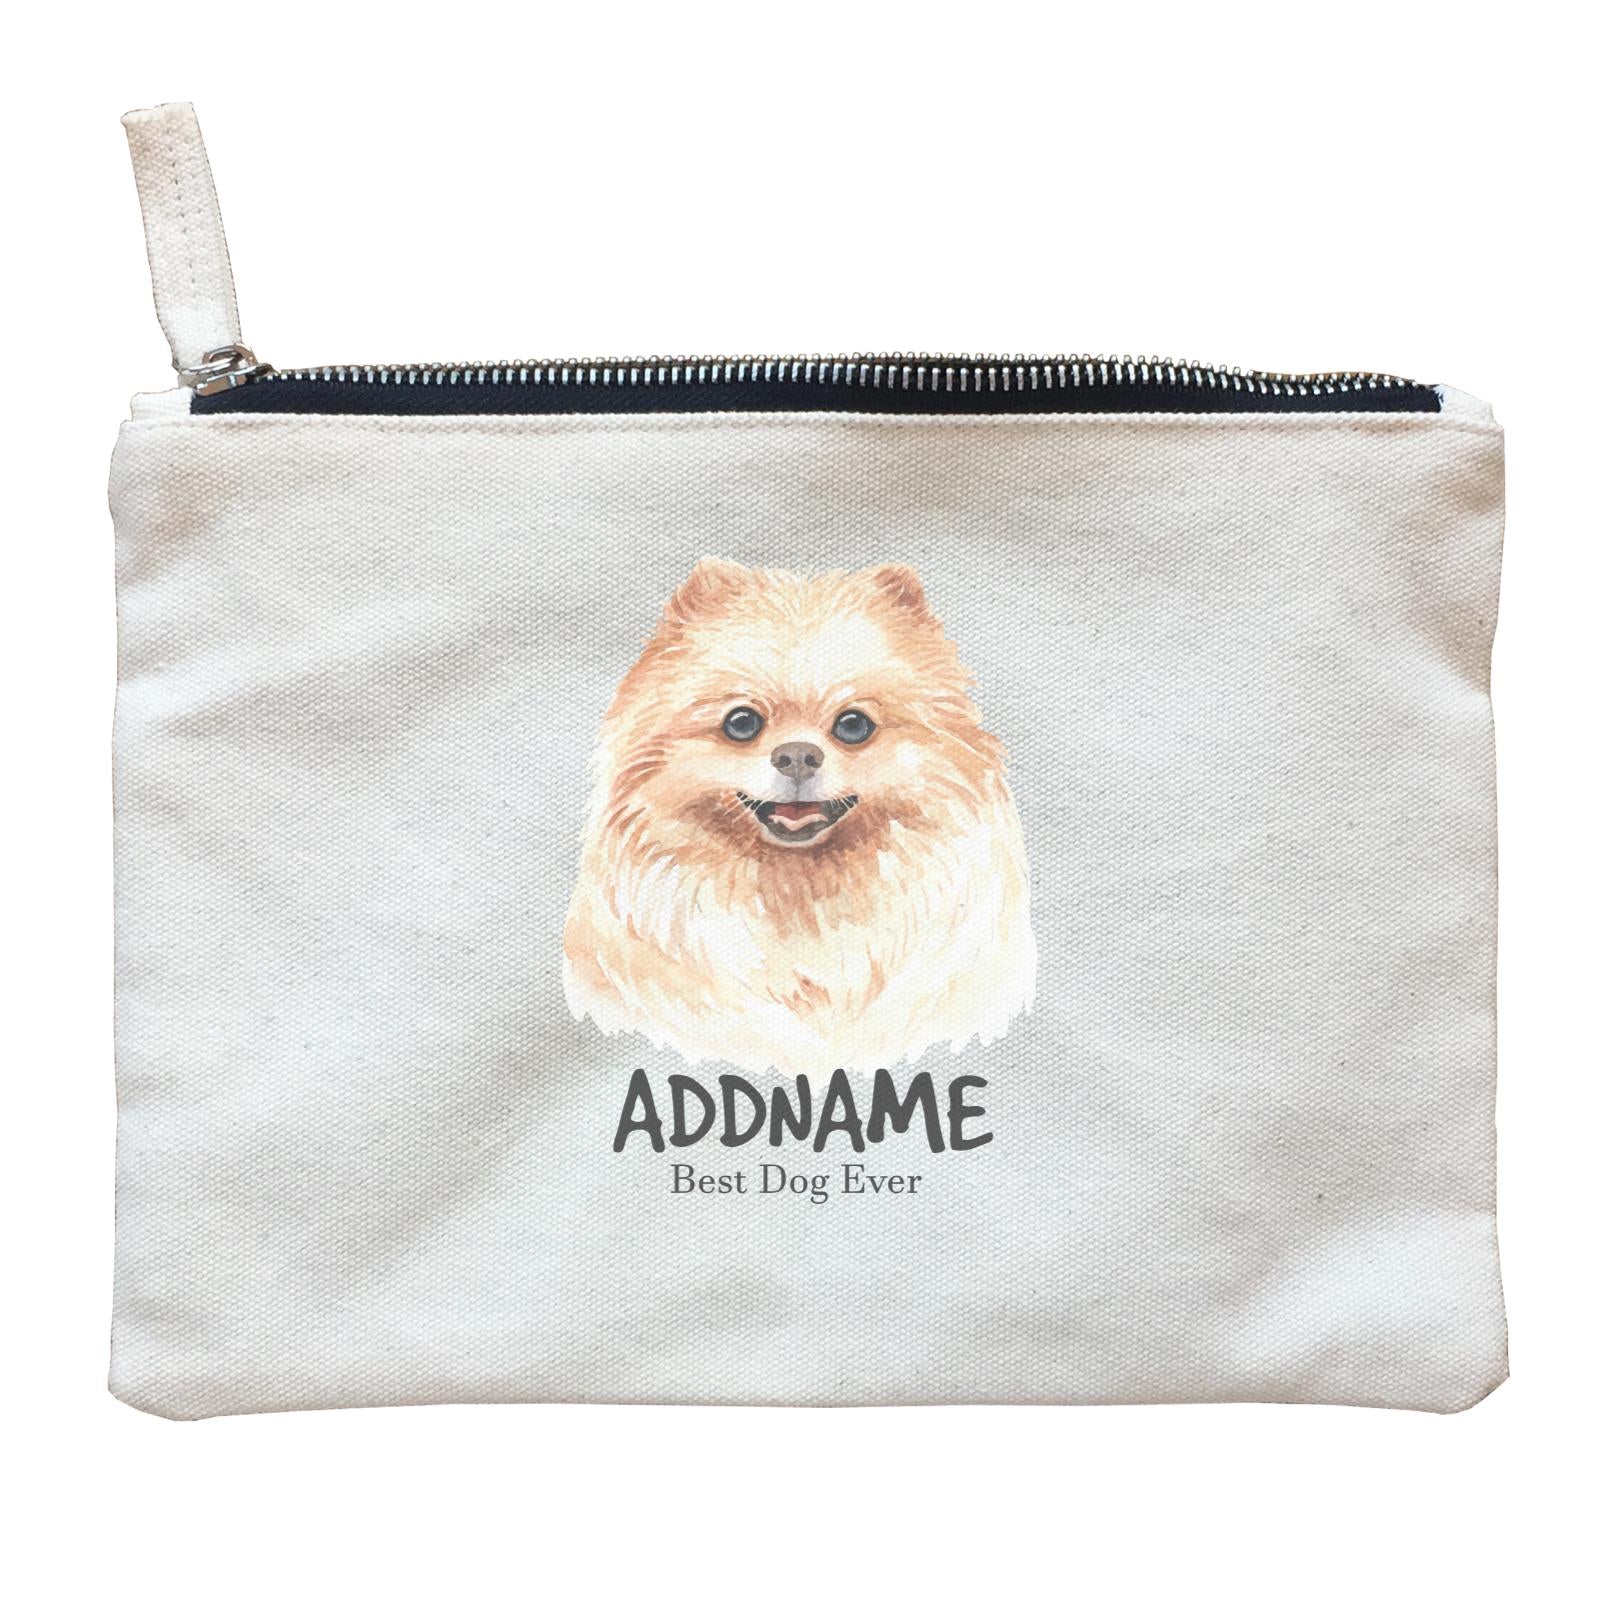 Watercolor Dog Pomeranian Best Dog Ever Addname Zipper Pouch